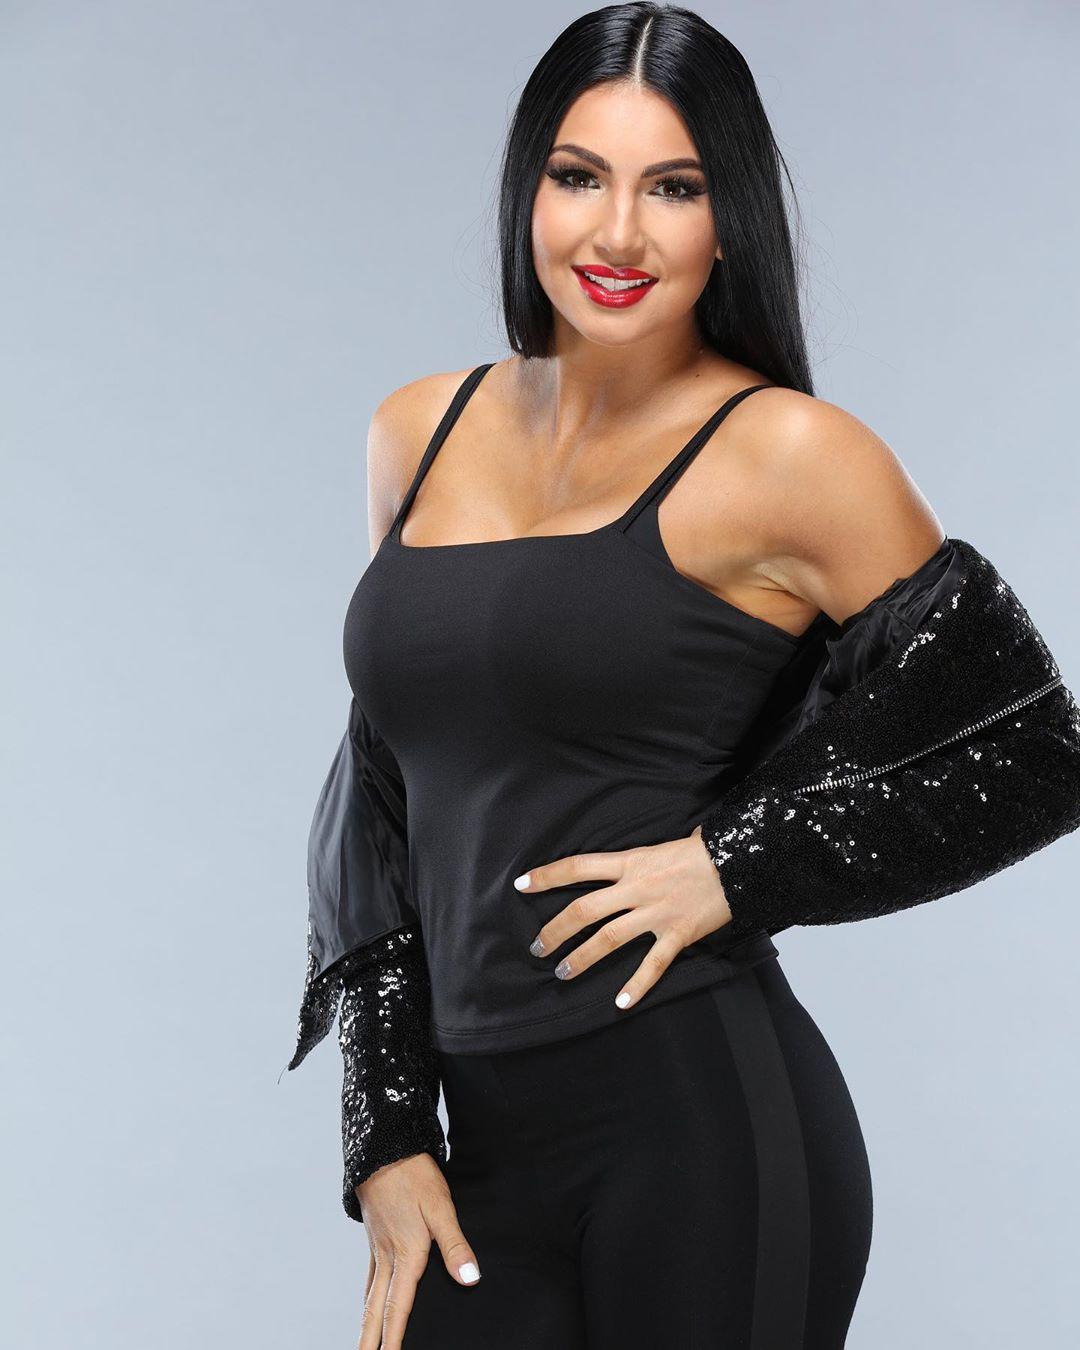 60+ Hot Pictures Of Billie Kay Will Rock The WWE Fan Inside You 176